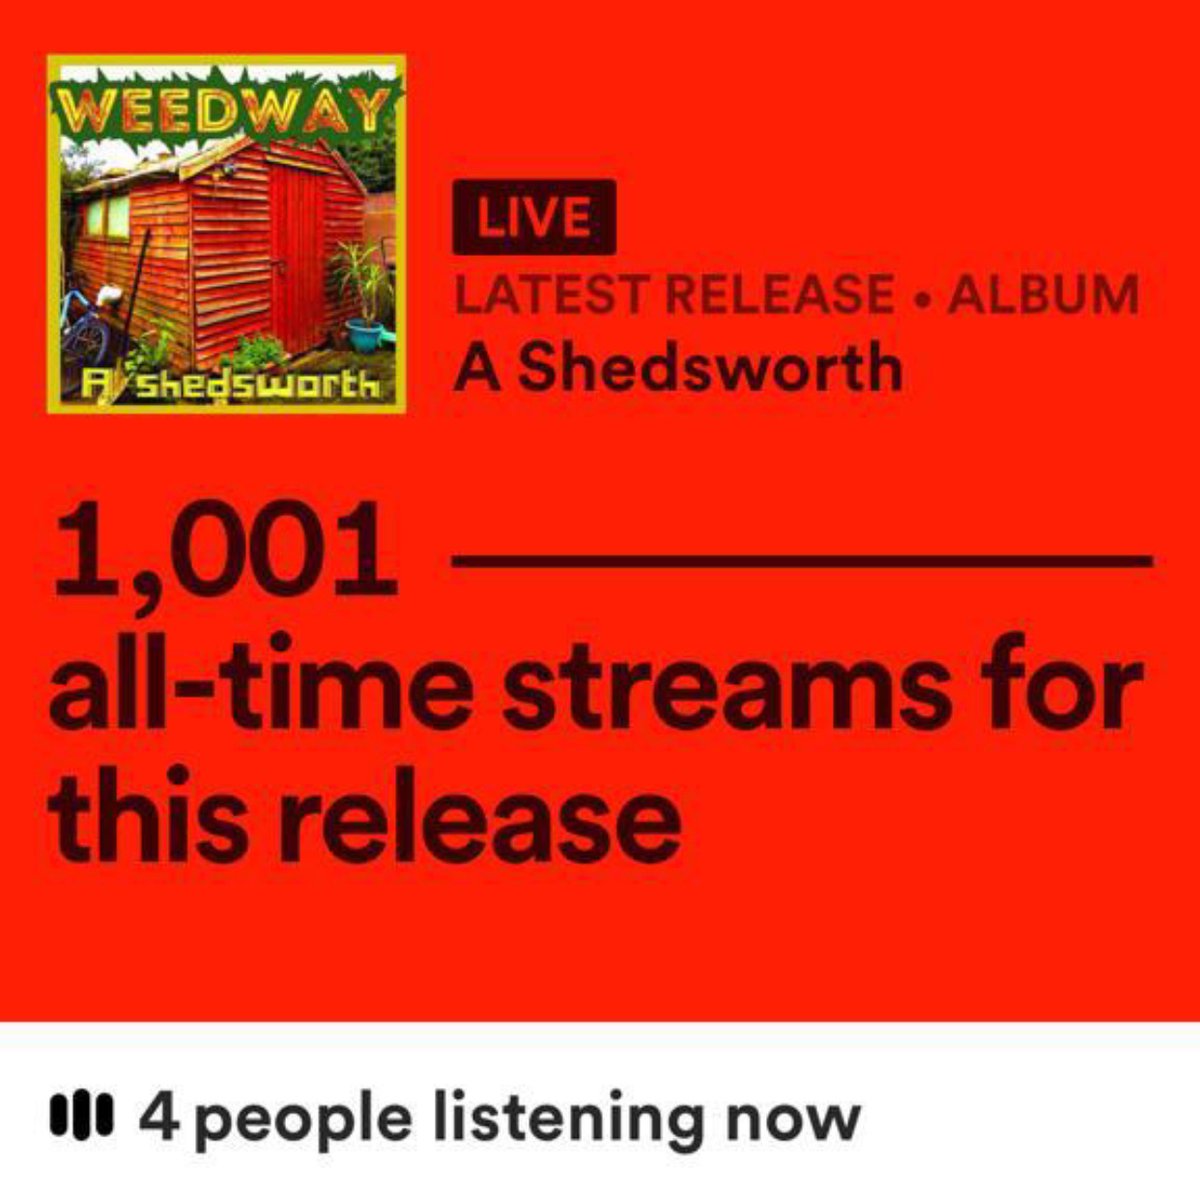 Over 1k streams on Spotify since it’s release yesterday 🫵 thanks everyone who’s doing the streaming ❤️💛💚